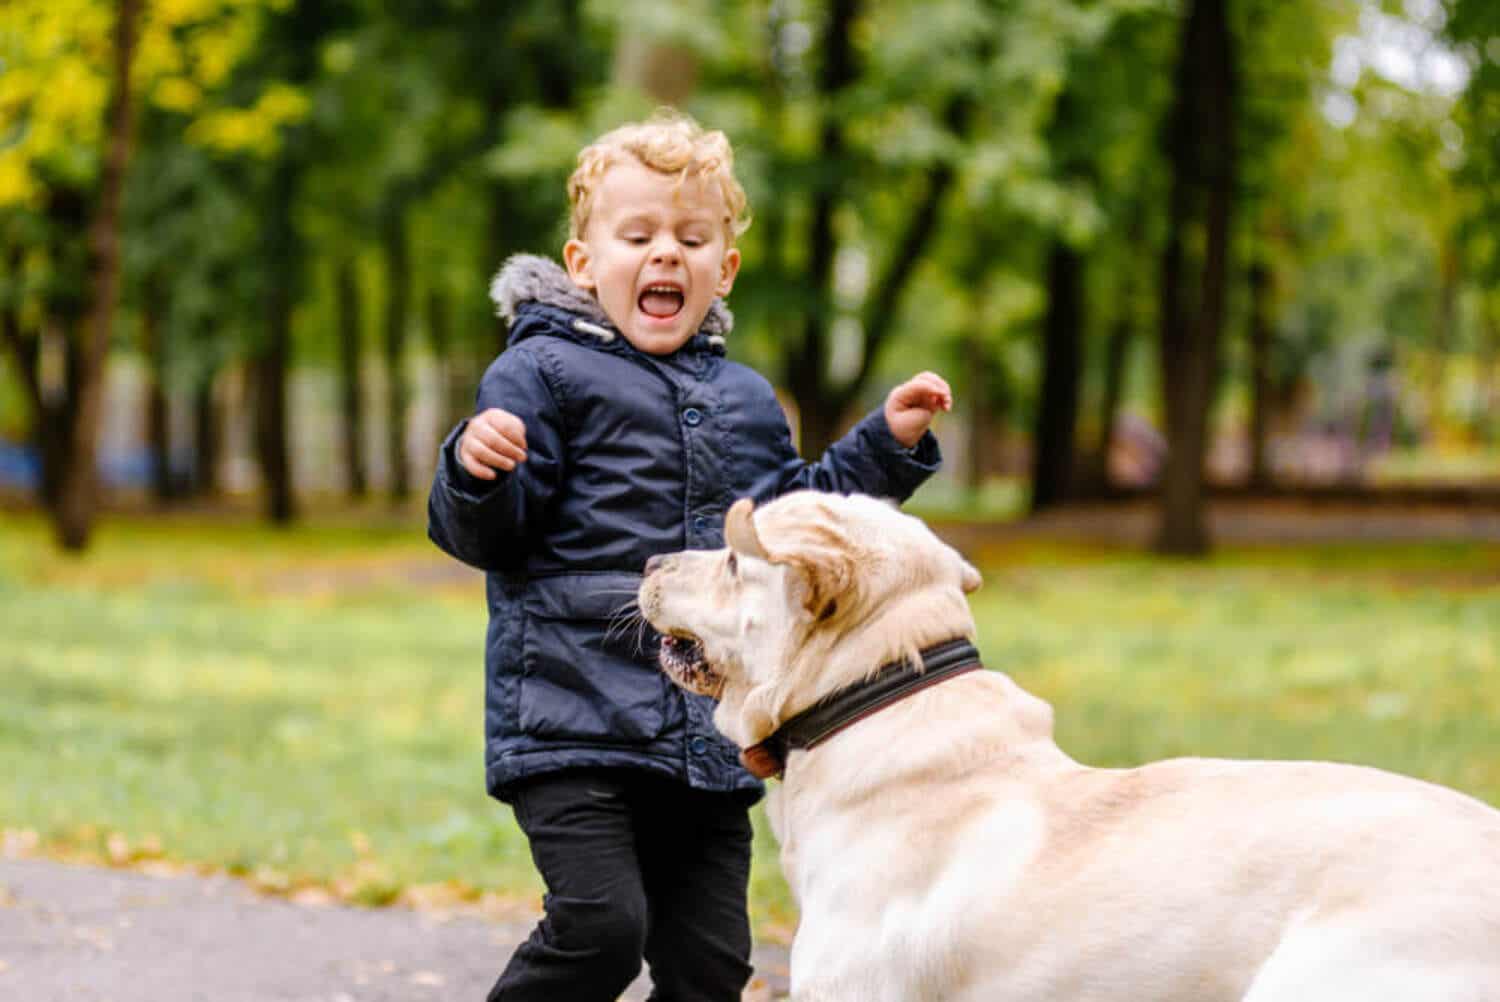 A child startled by a dog in the park.